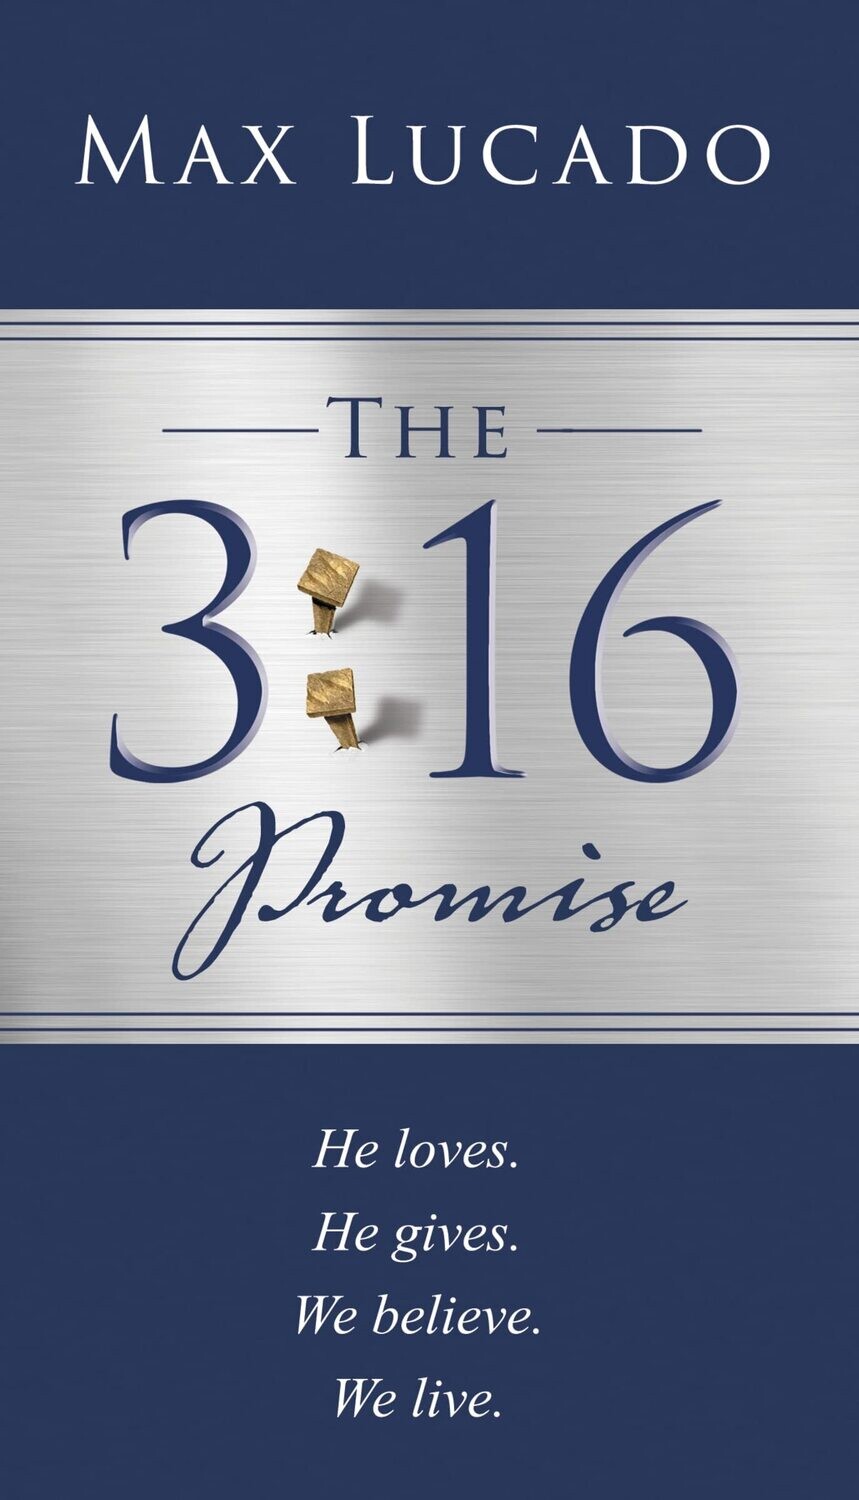 Max Lucado - The 3:16 Promise: He Loves